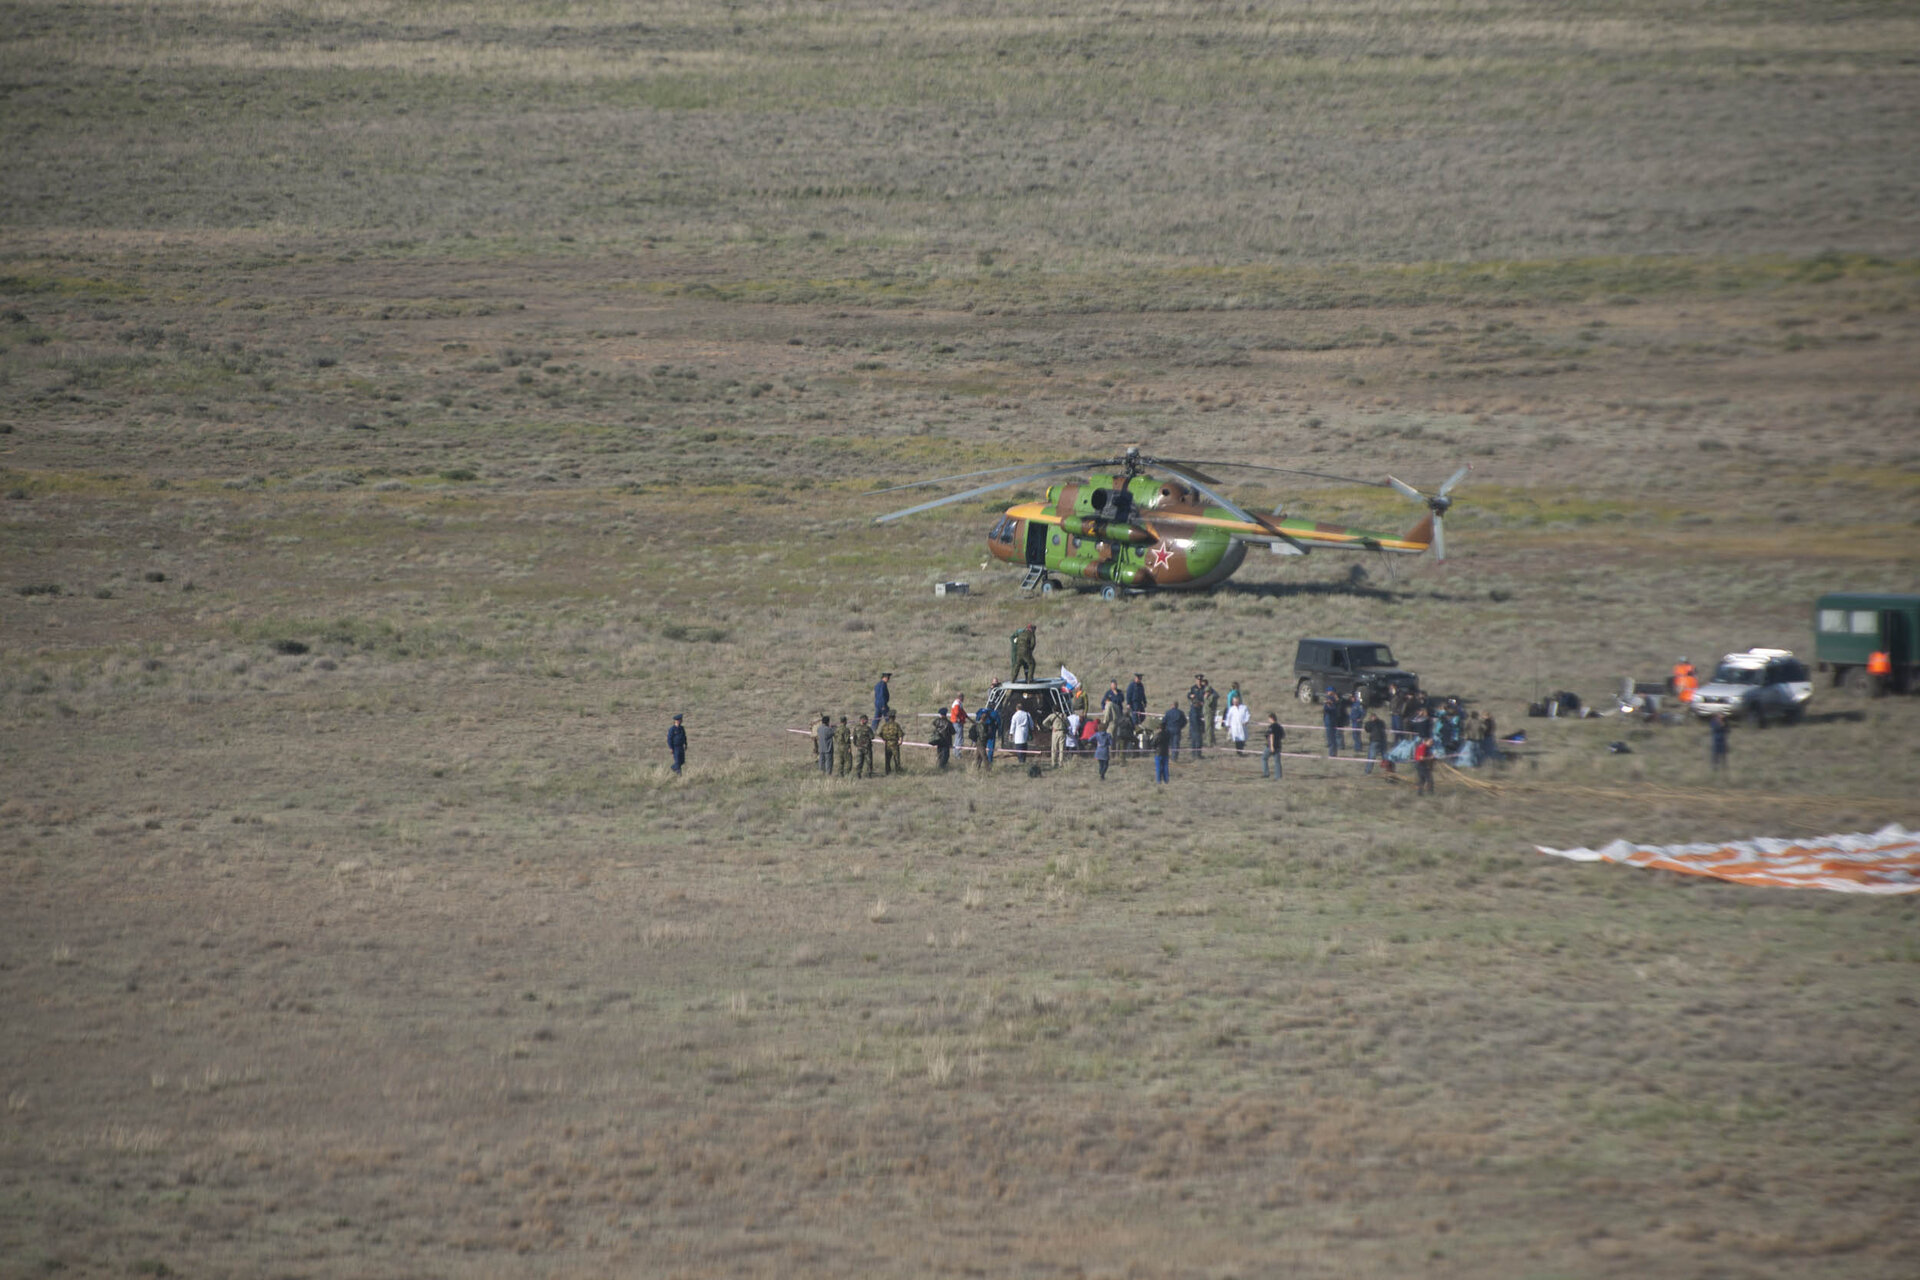 Soyuz TMA-20 surrounded by the ground crews